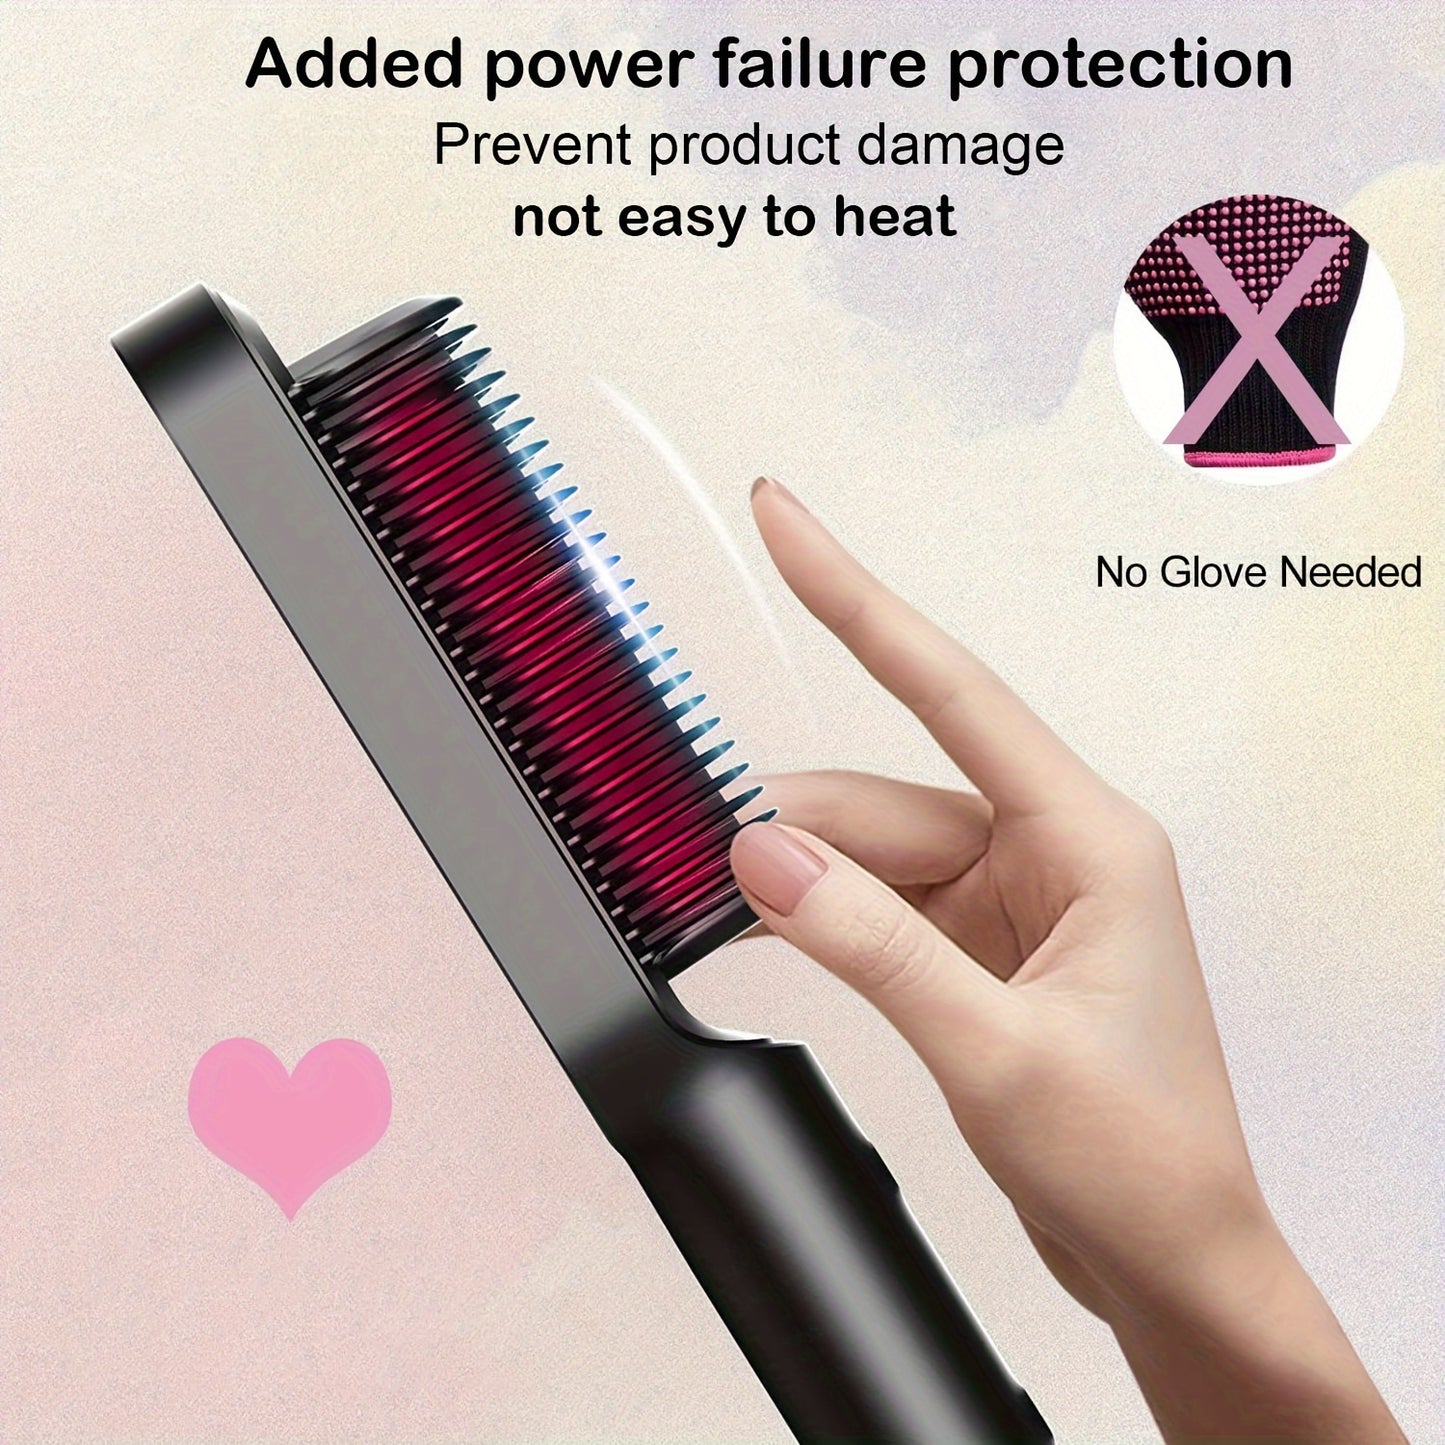 Upgraded Professional Heated Comb, Hair Straightener Comb, Anion Non-damaging Portable Electric Straightener Brush